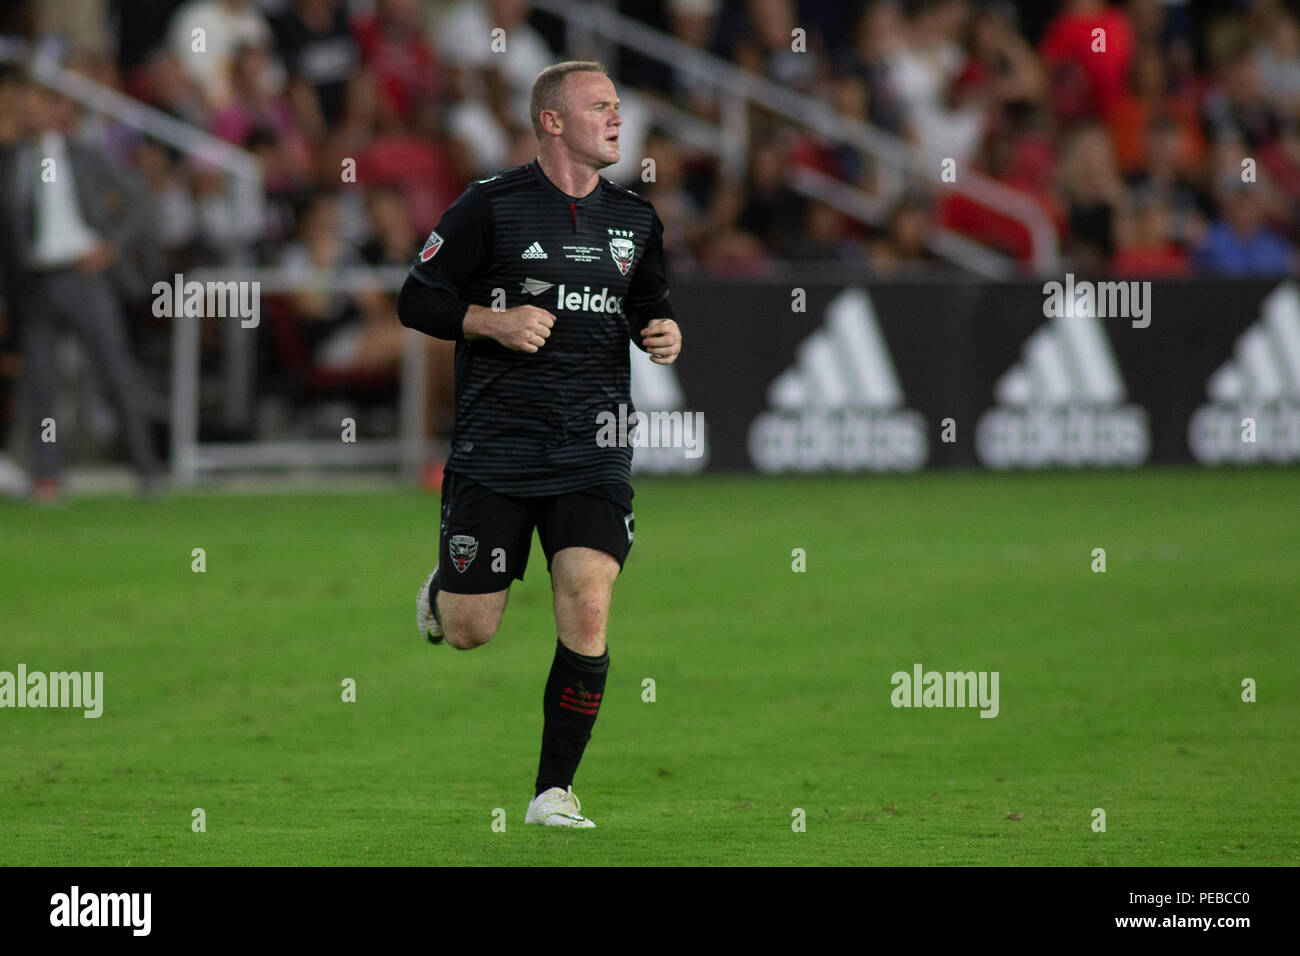 Washington, United States. 14th July, 2018. D.C. United forward Wayne Rooney (9) runs during the game between D.C. United and Vancouver Whitecaps at Audi Filed in Washington, DC on July 14, 2018. D.C. This is D.C. United's first game at Audi Field. Credit: The Photo Access/Alamy Live News Stock Photo